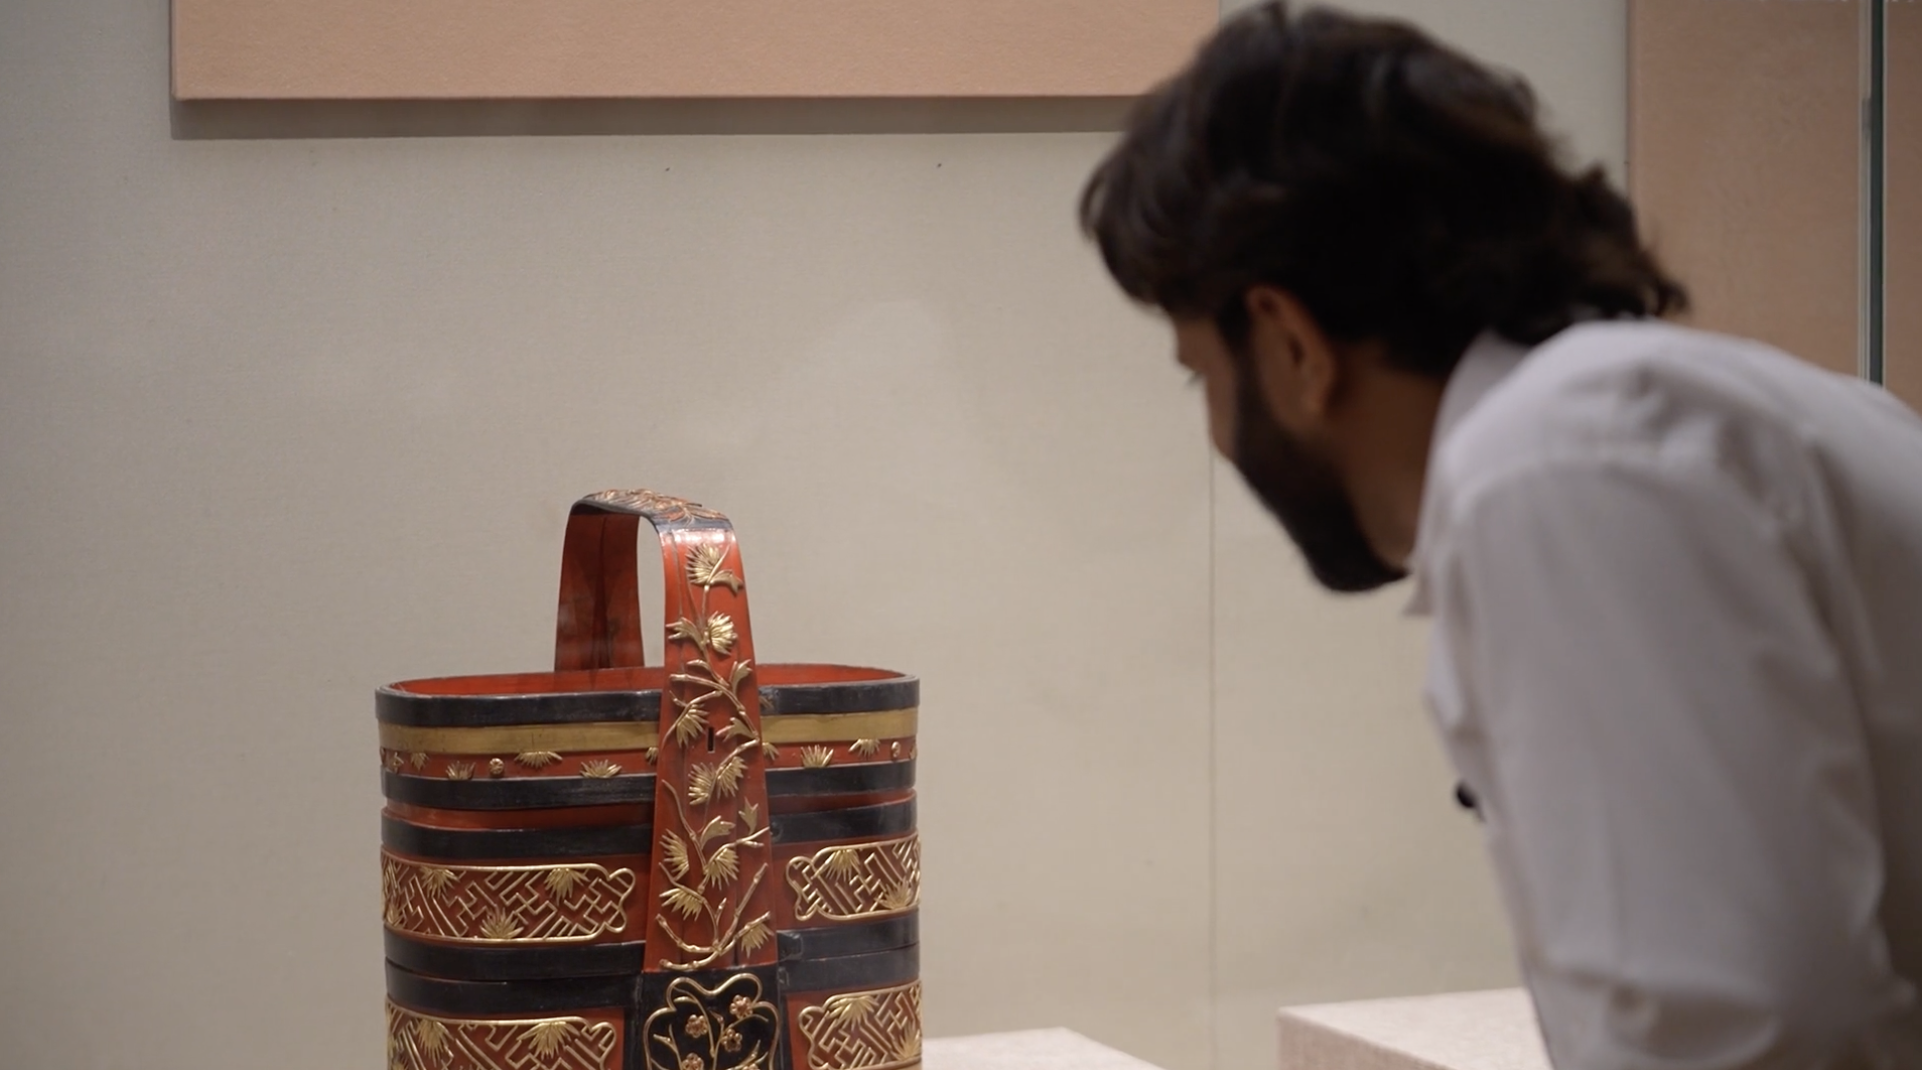 The lacquer portable box decorated with auspicious flowers and plants is exhibited at Tsinghua University Art Museum in Beijing. /CGTN